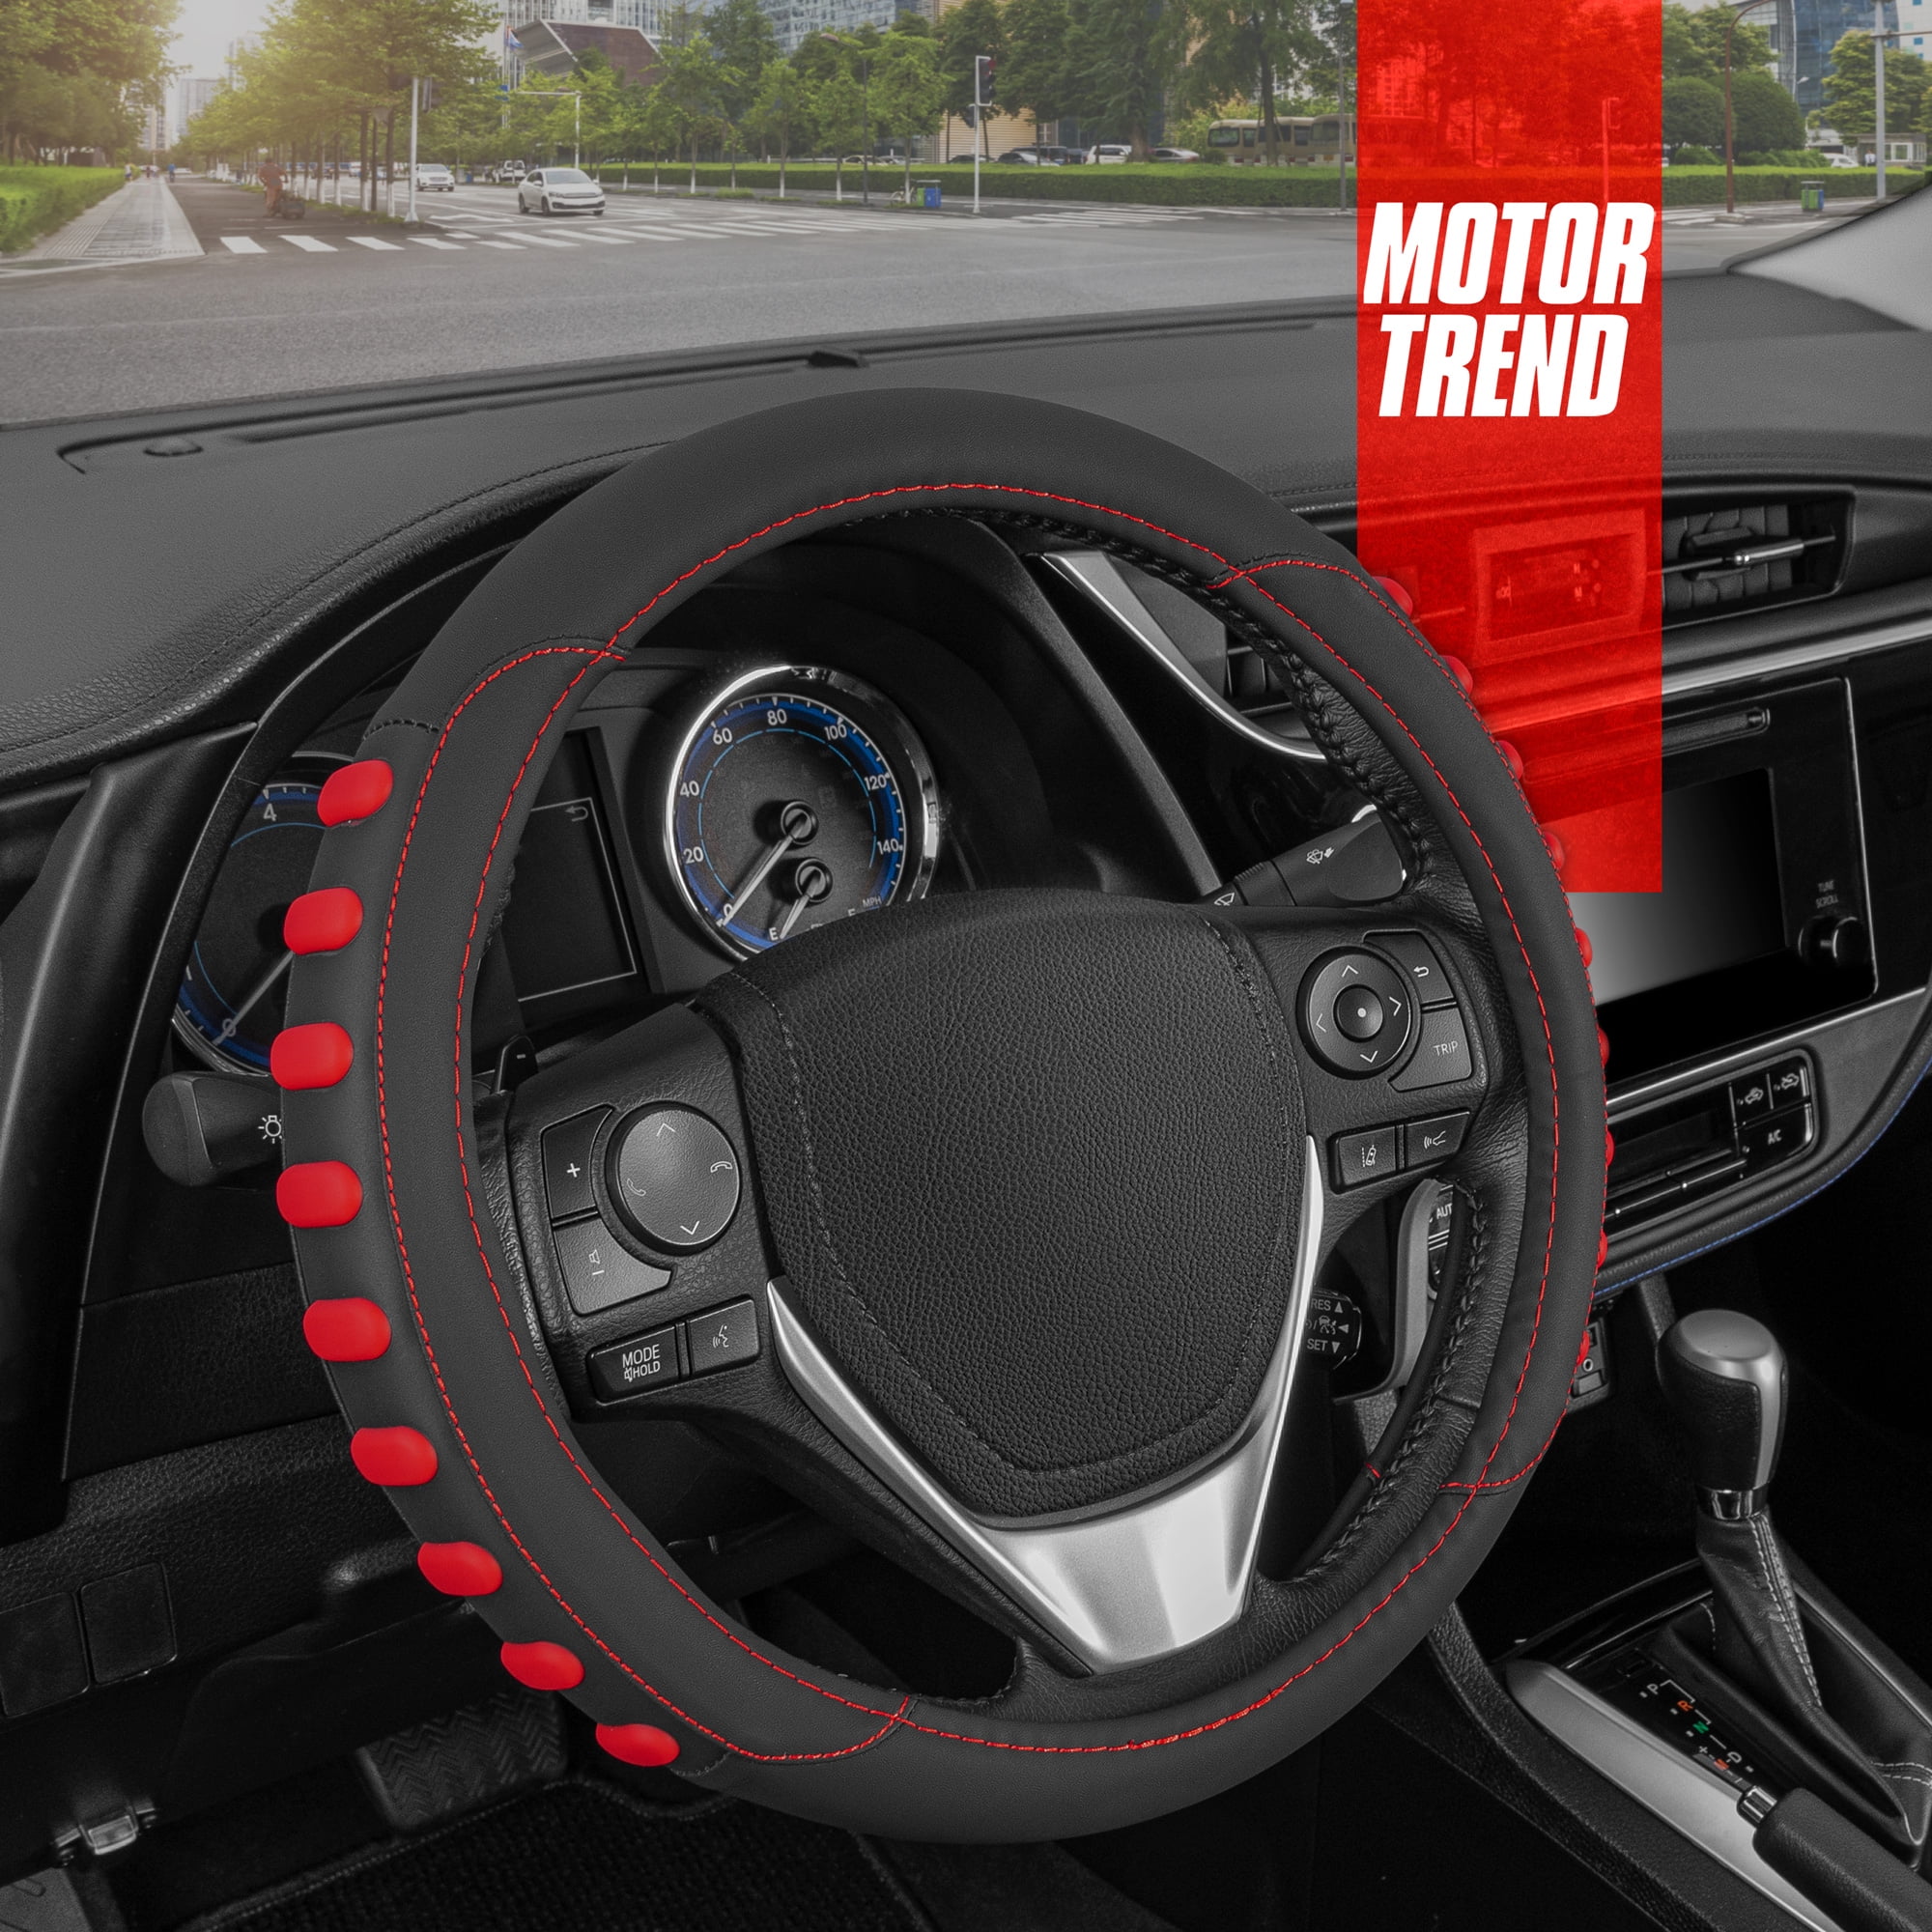 Motor Trend SW-809-BG Beige Classic Stitch Perforated Simulated Leather Steering Wheel Cover 